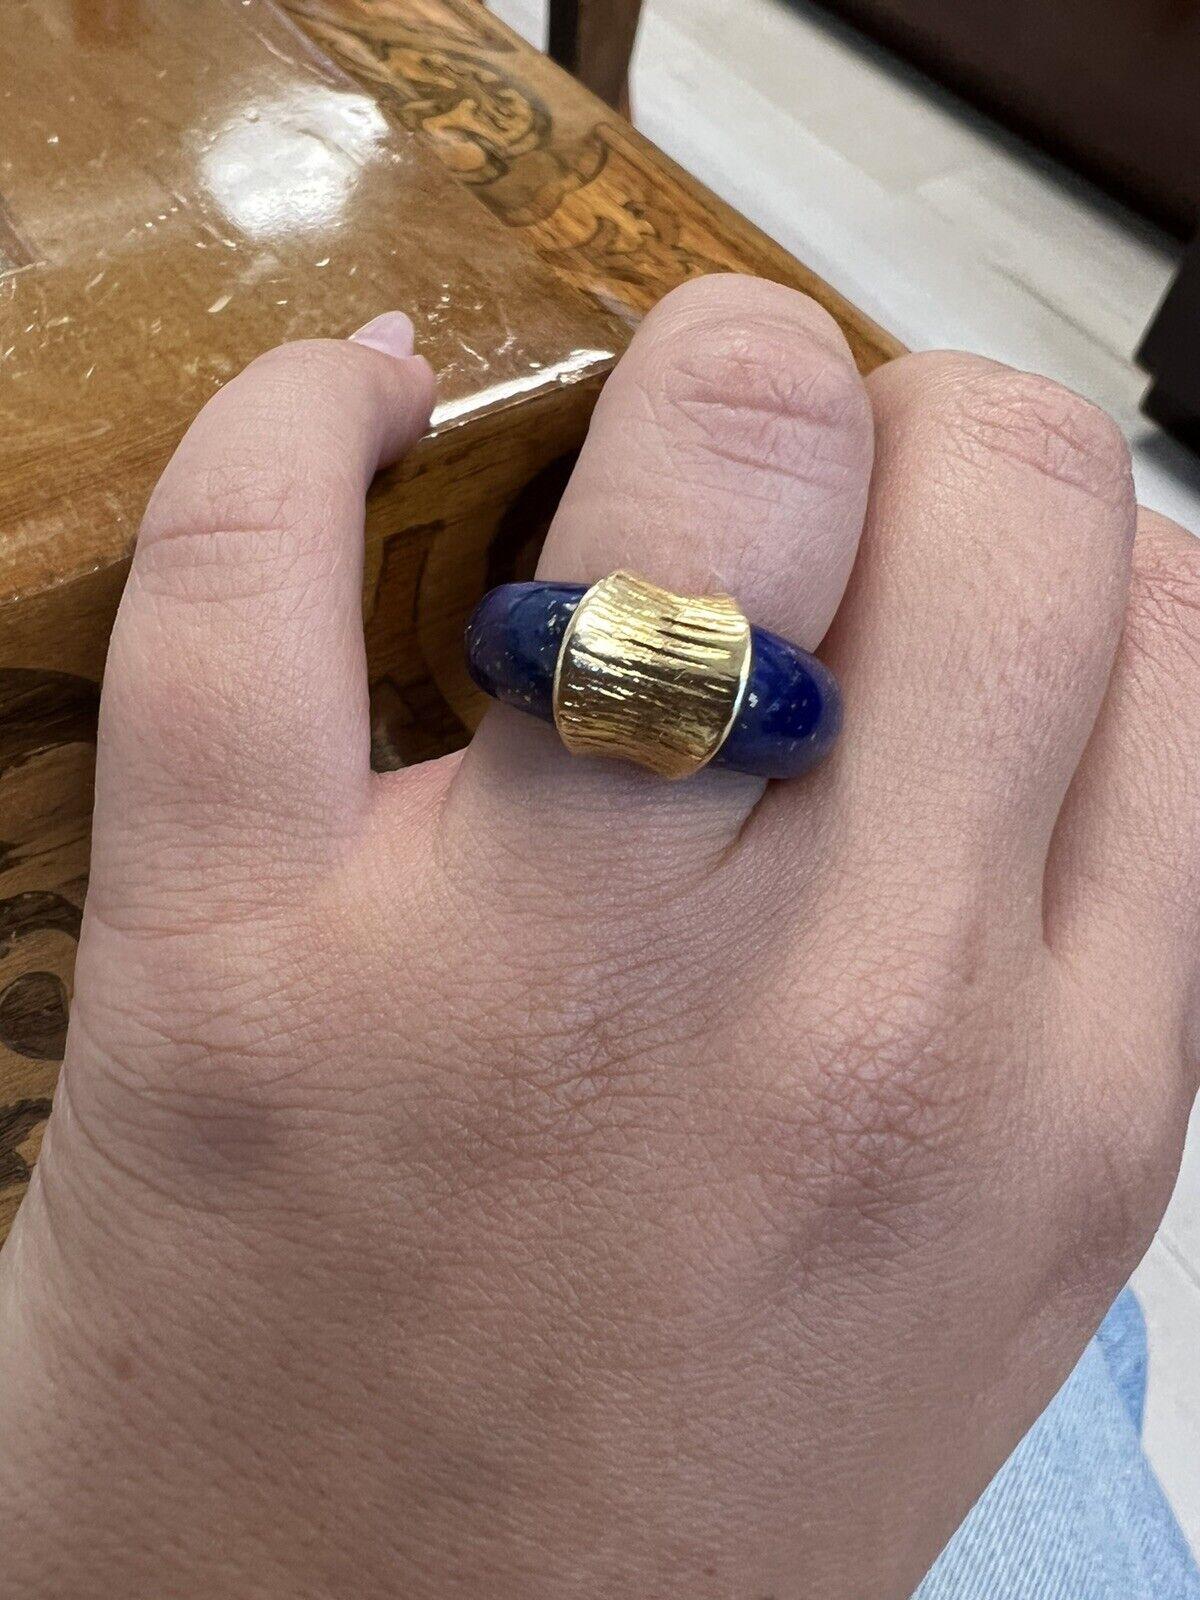 Fred Paris 18k Yellow Gold & Lapis Ring Vintage

Here is your chance to purchase a beautiful and highly collectible designer ring.  Truly a great piece at a great price! 

The weight is 9.4 grams.  The width is 10.9-4.4 mm.  The ring size is 6.5. 